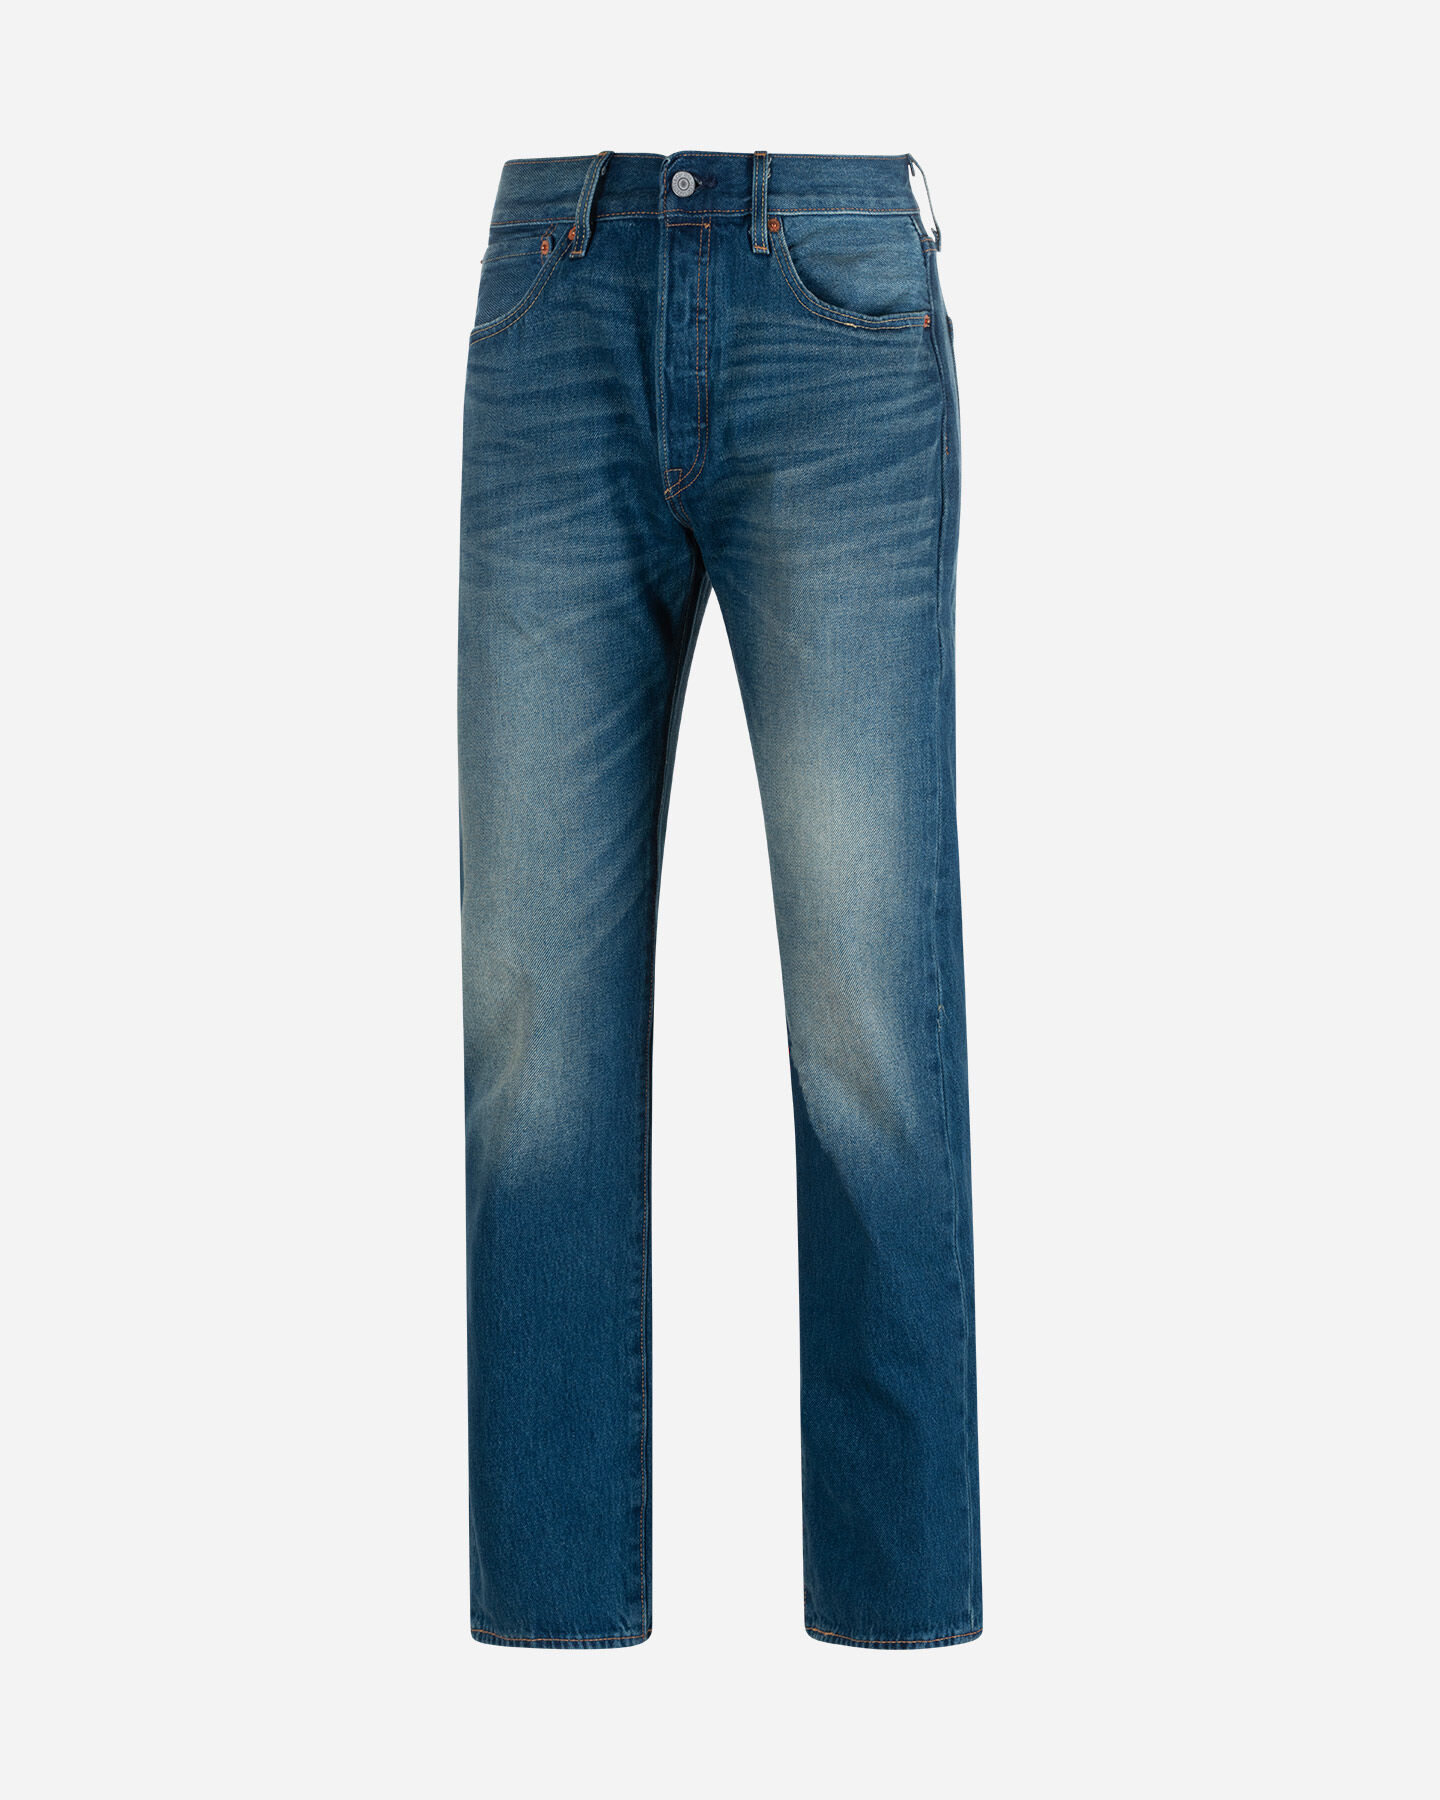  Jeans LEVI'S 501 REGULAR M S4122315|3382|33 scatto 0